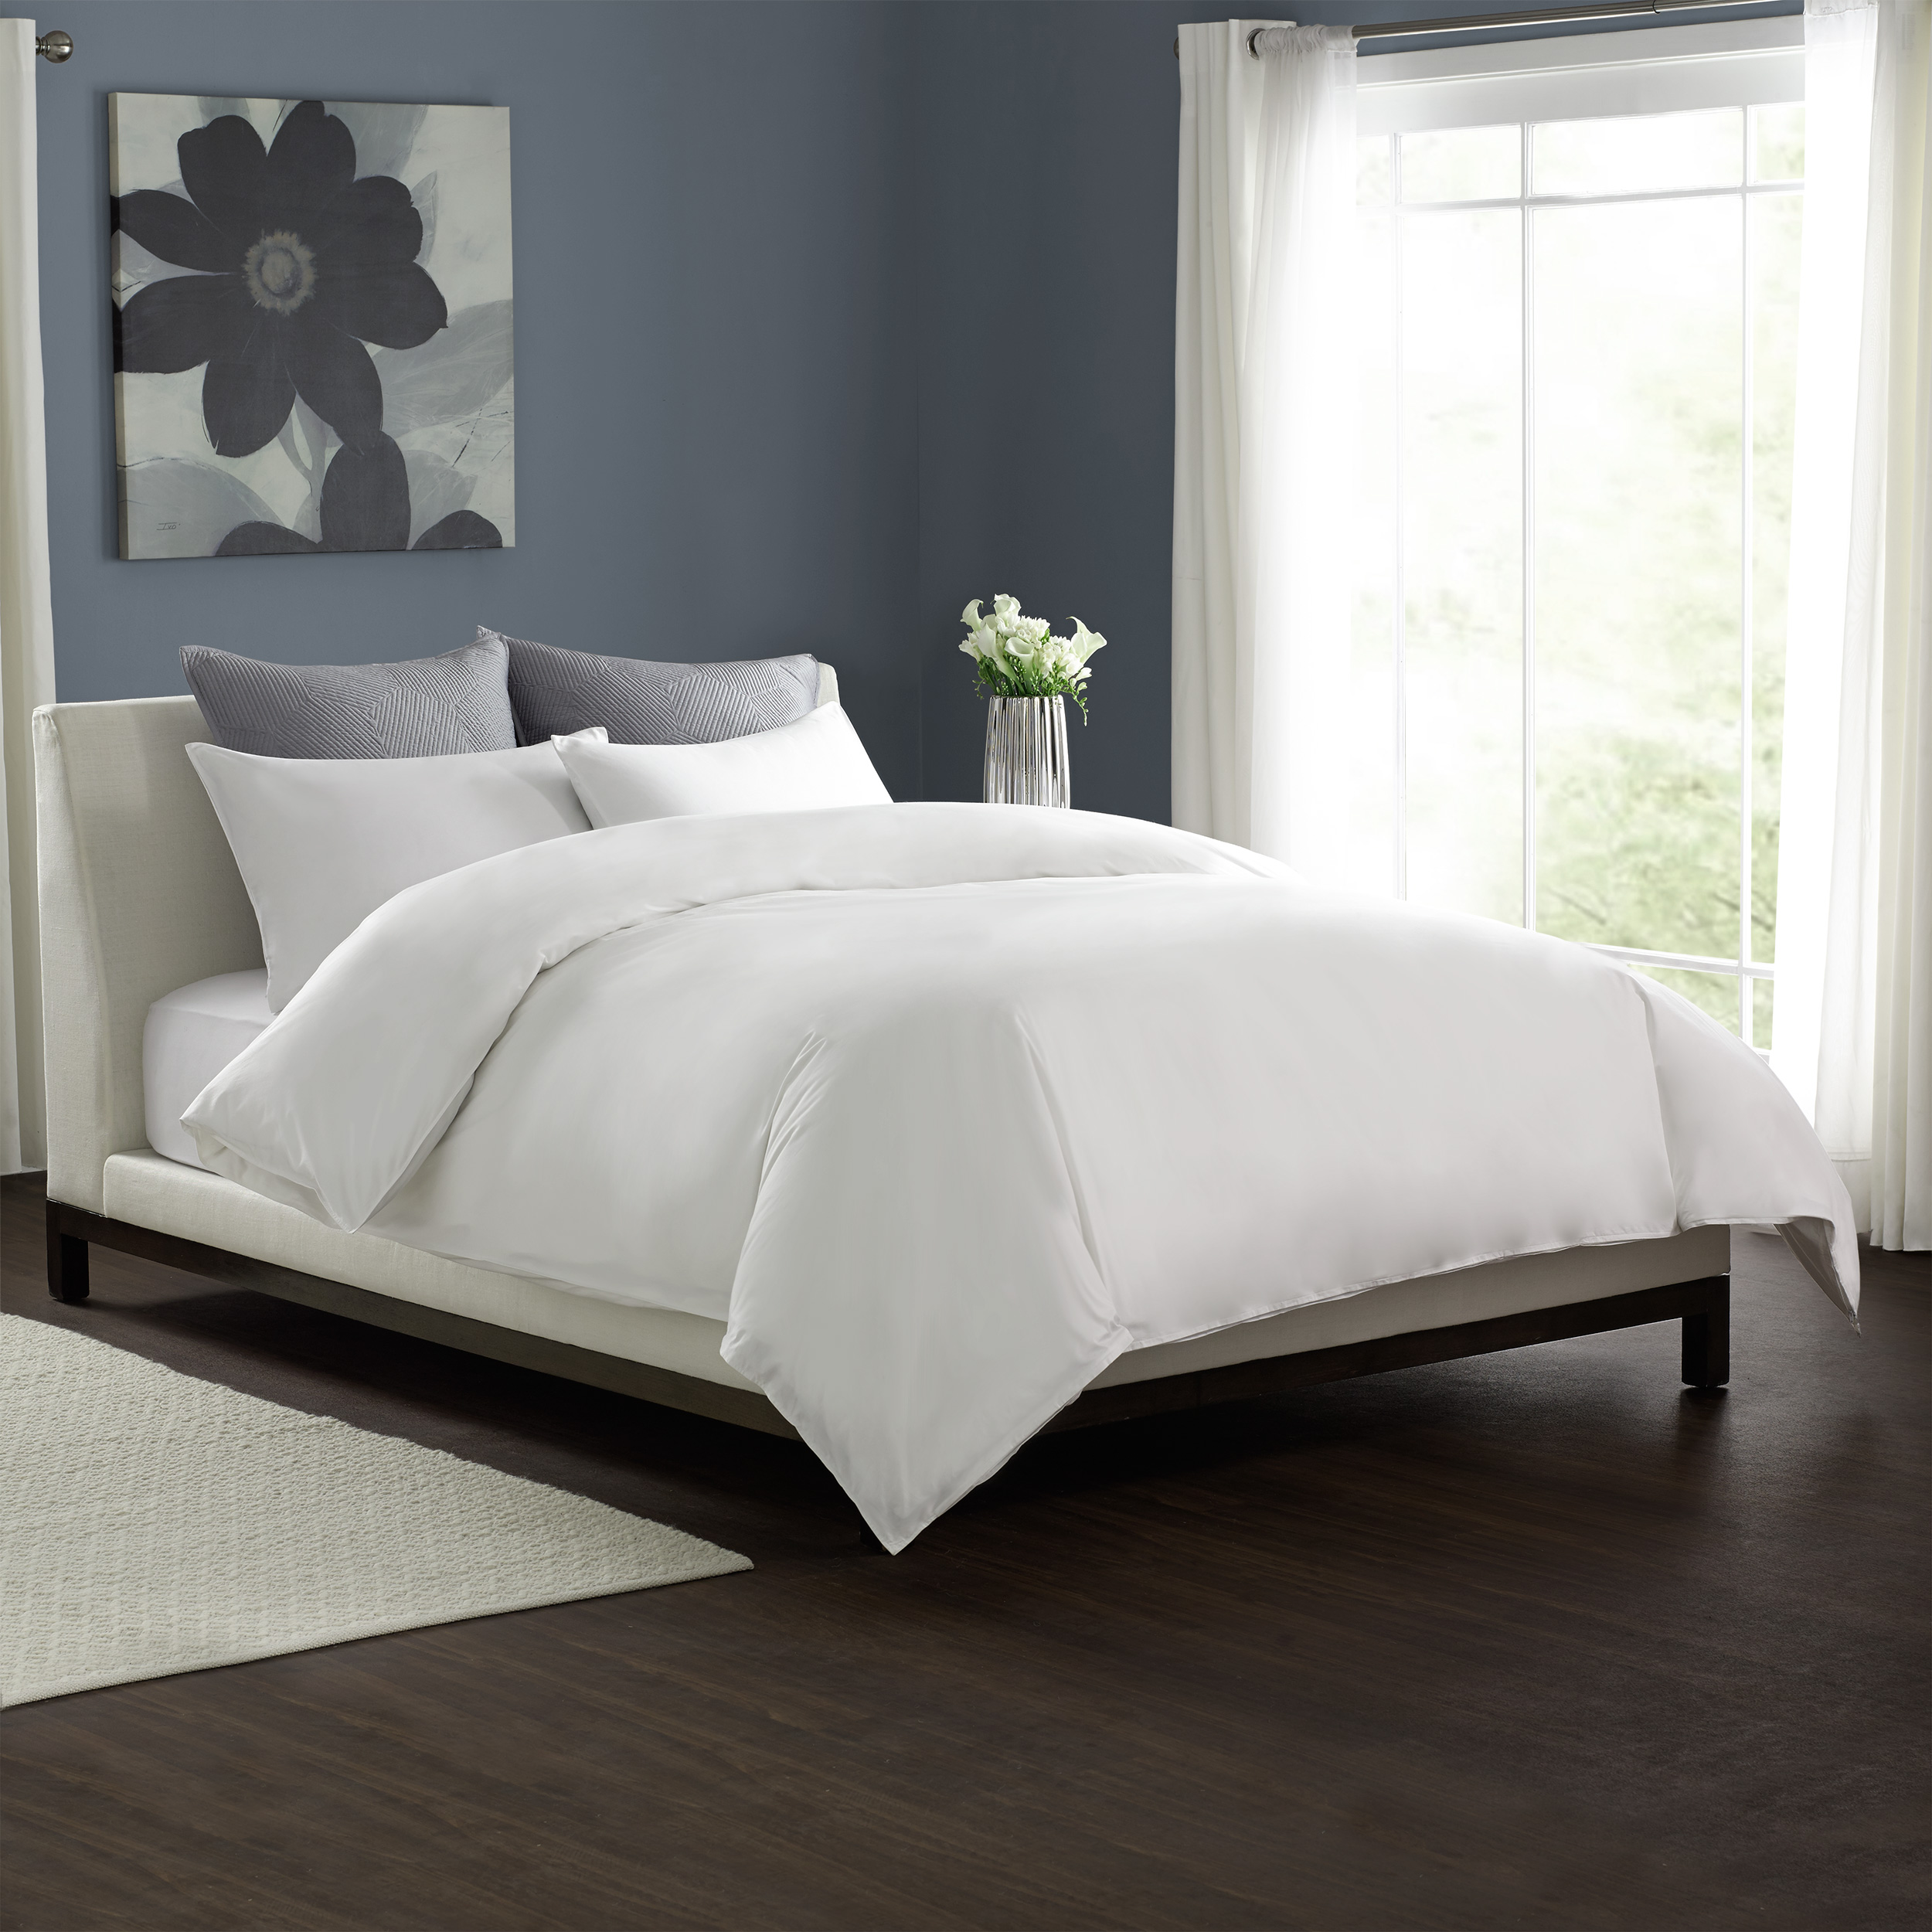 Basic Duvet Cover Pacific Coast Bedding, Do You Need A Duvet Cover For A Down Comforter